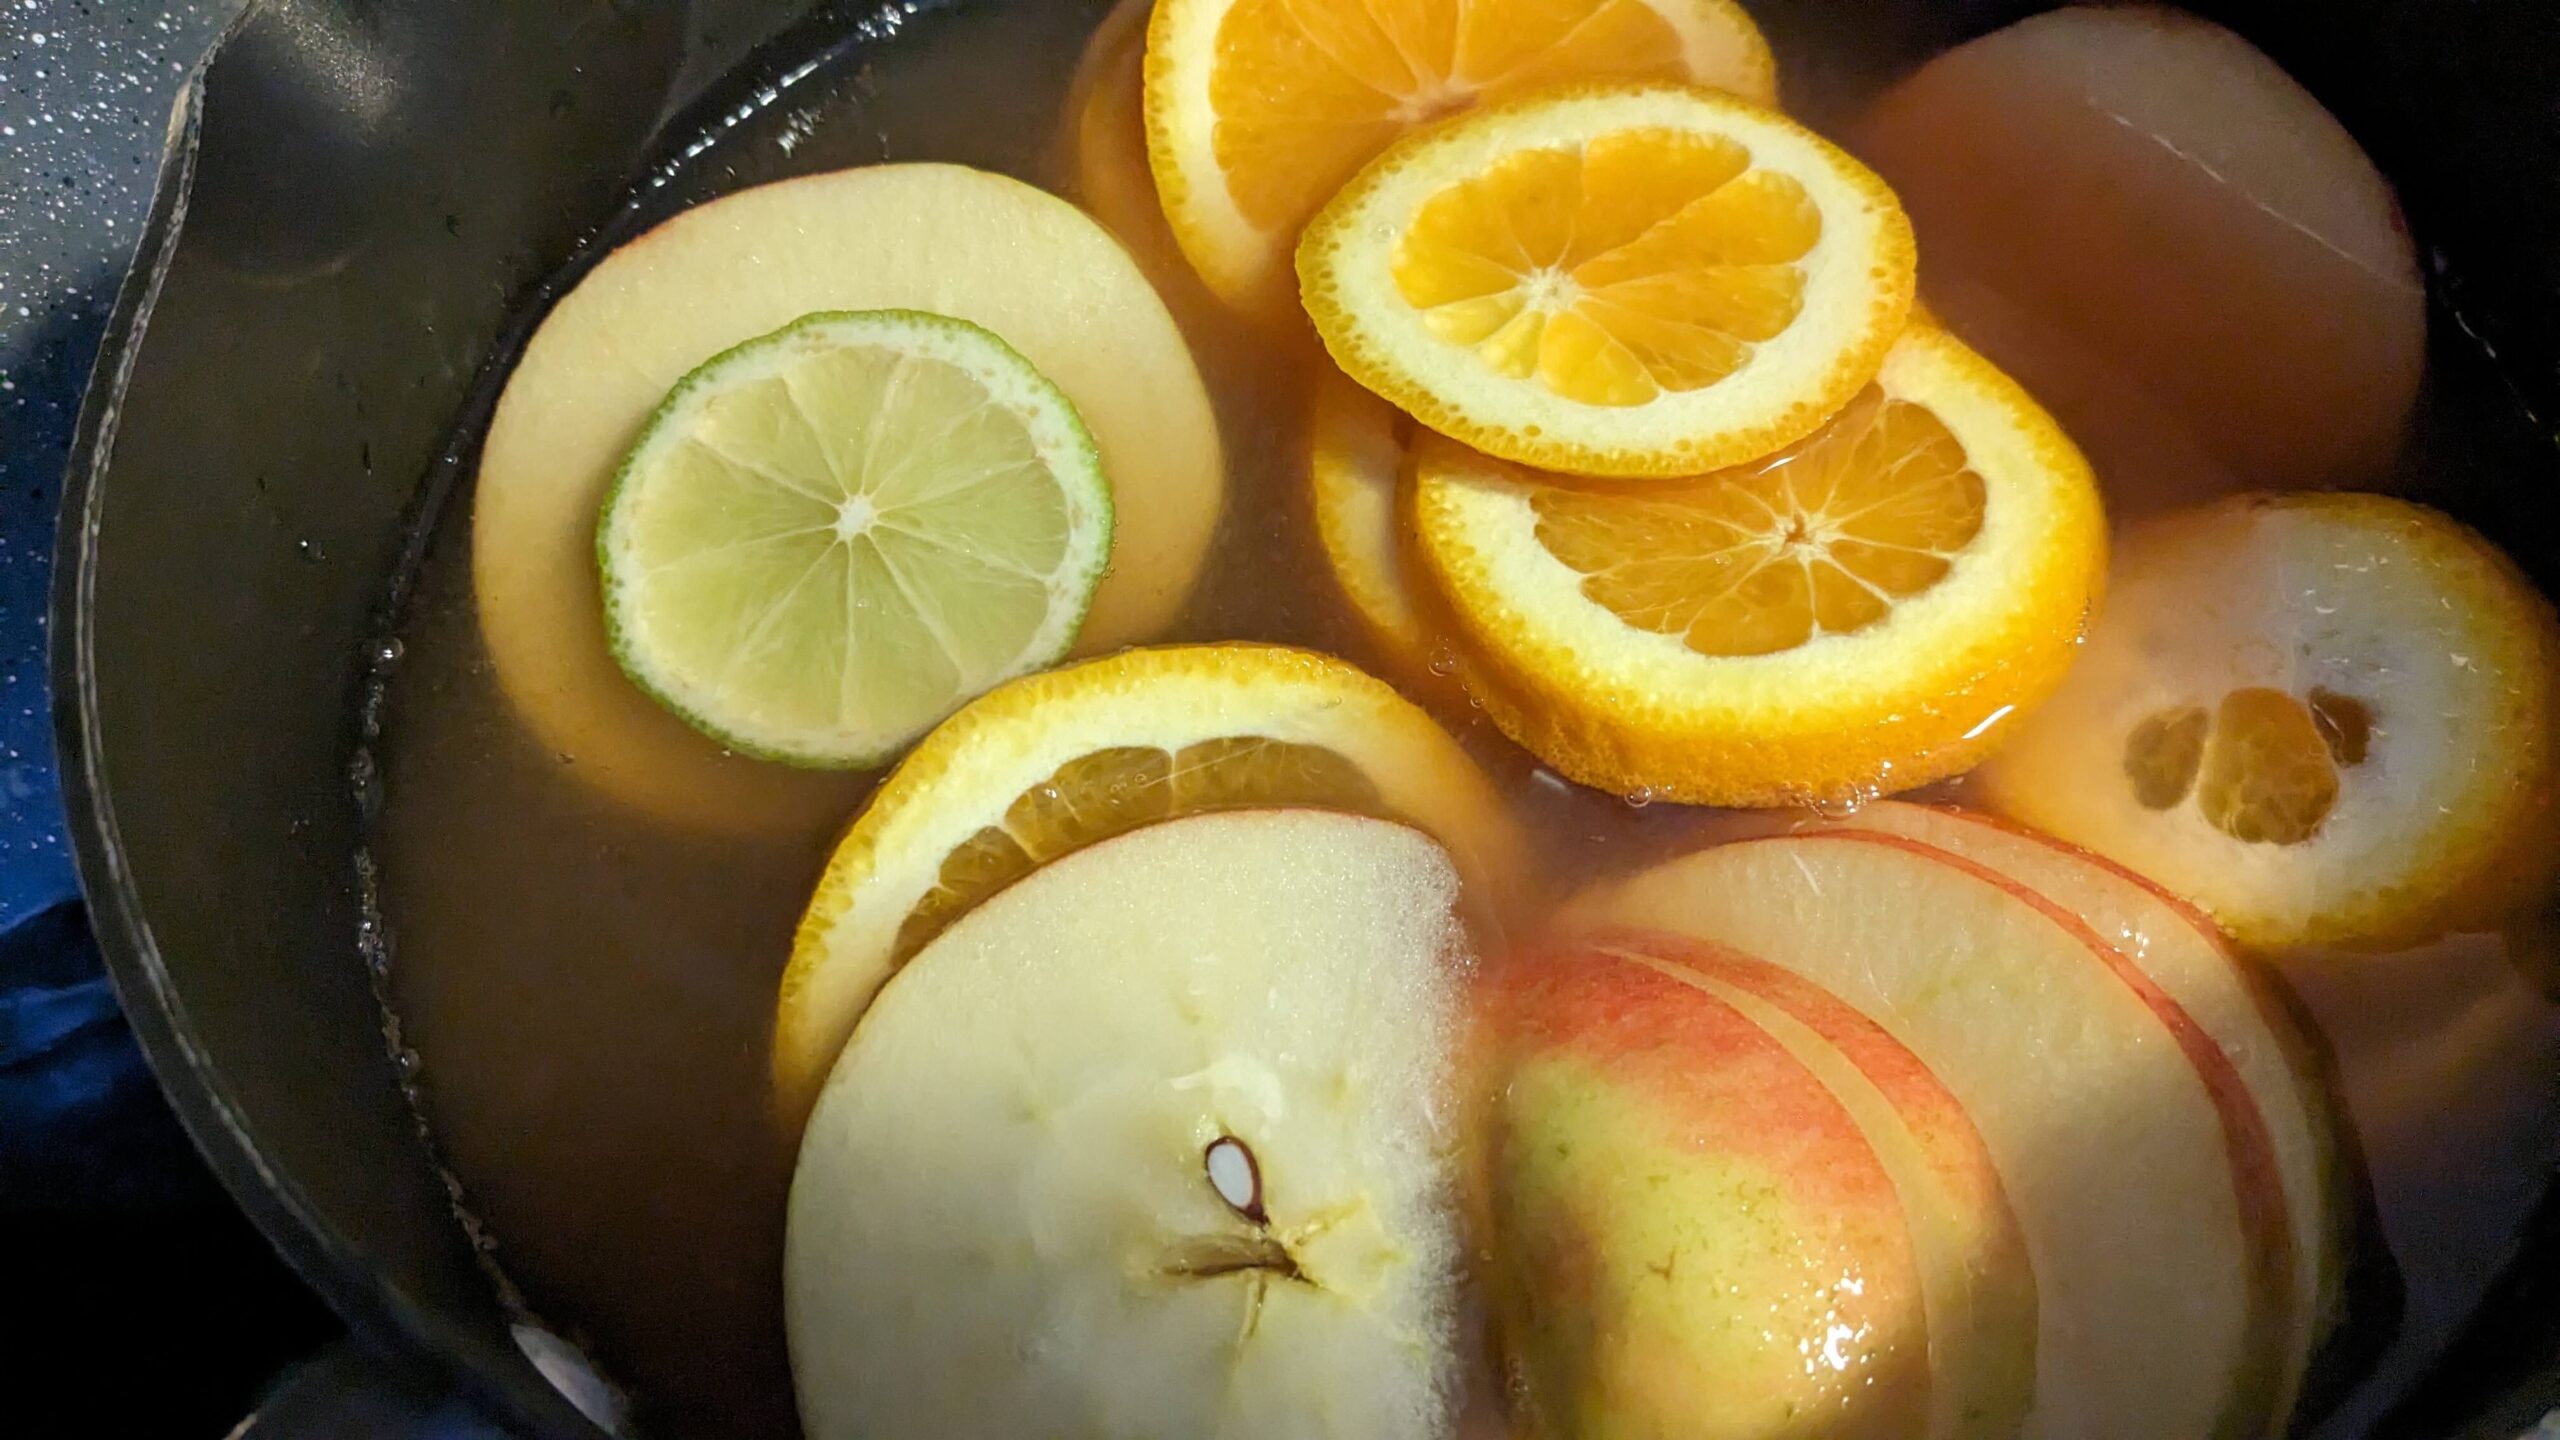 slices of oranges, limes, and apples in a pot of apple juice